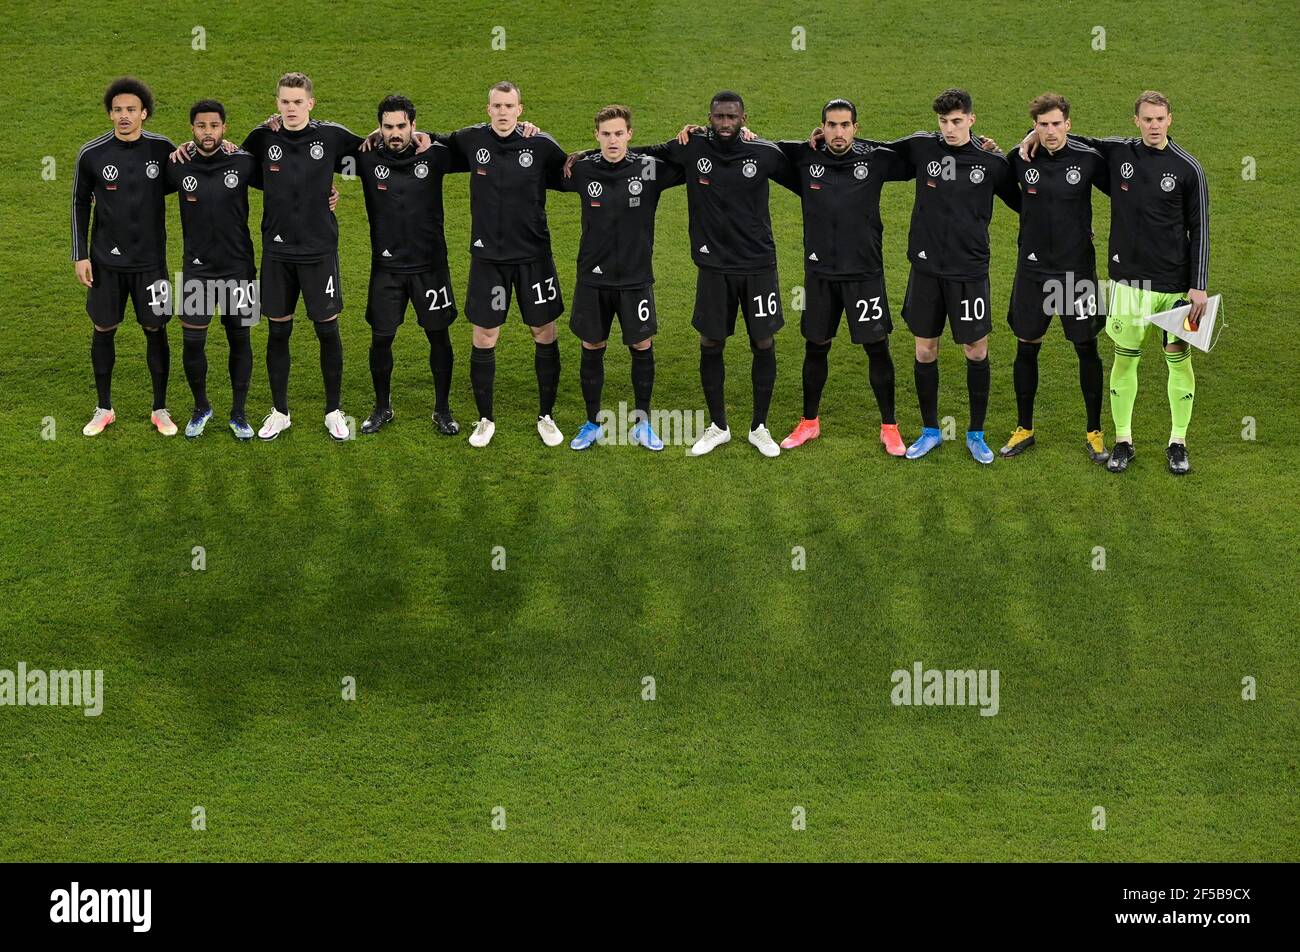 Soccer Football - World Cup Qualifiers Europe - Group J - Germany v Iceland - MSV-Arena, Duisburg, Germany - March 25, 2021 Germany line up before the match Pool via REUTERS/Tobias Schwarz Stock Photo